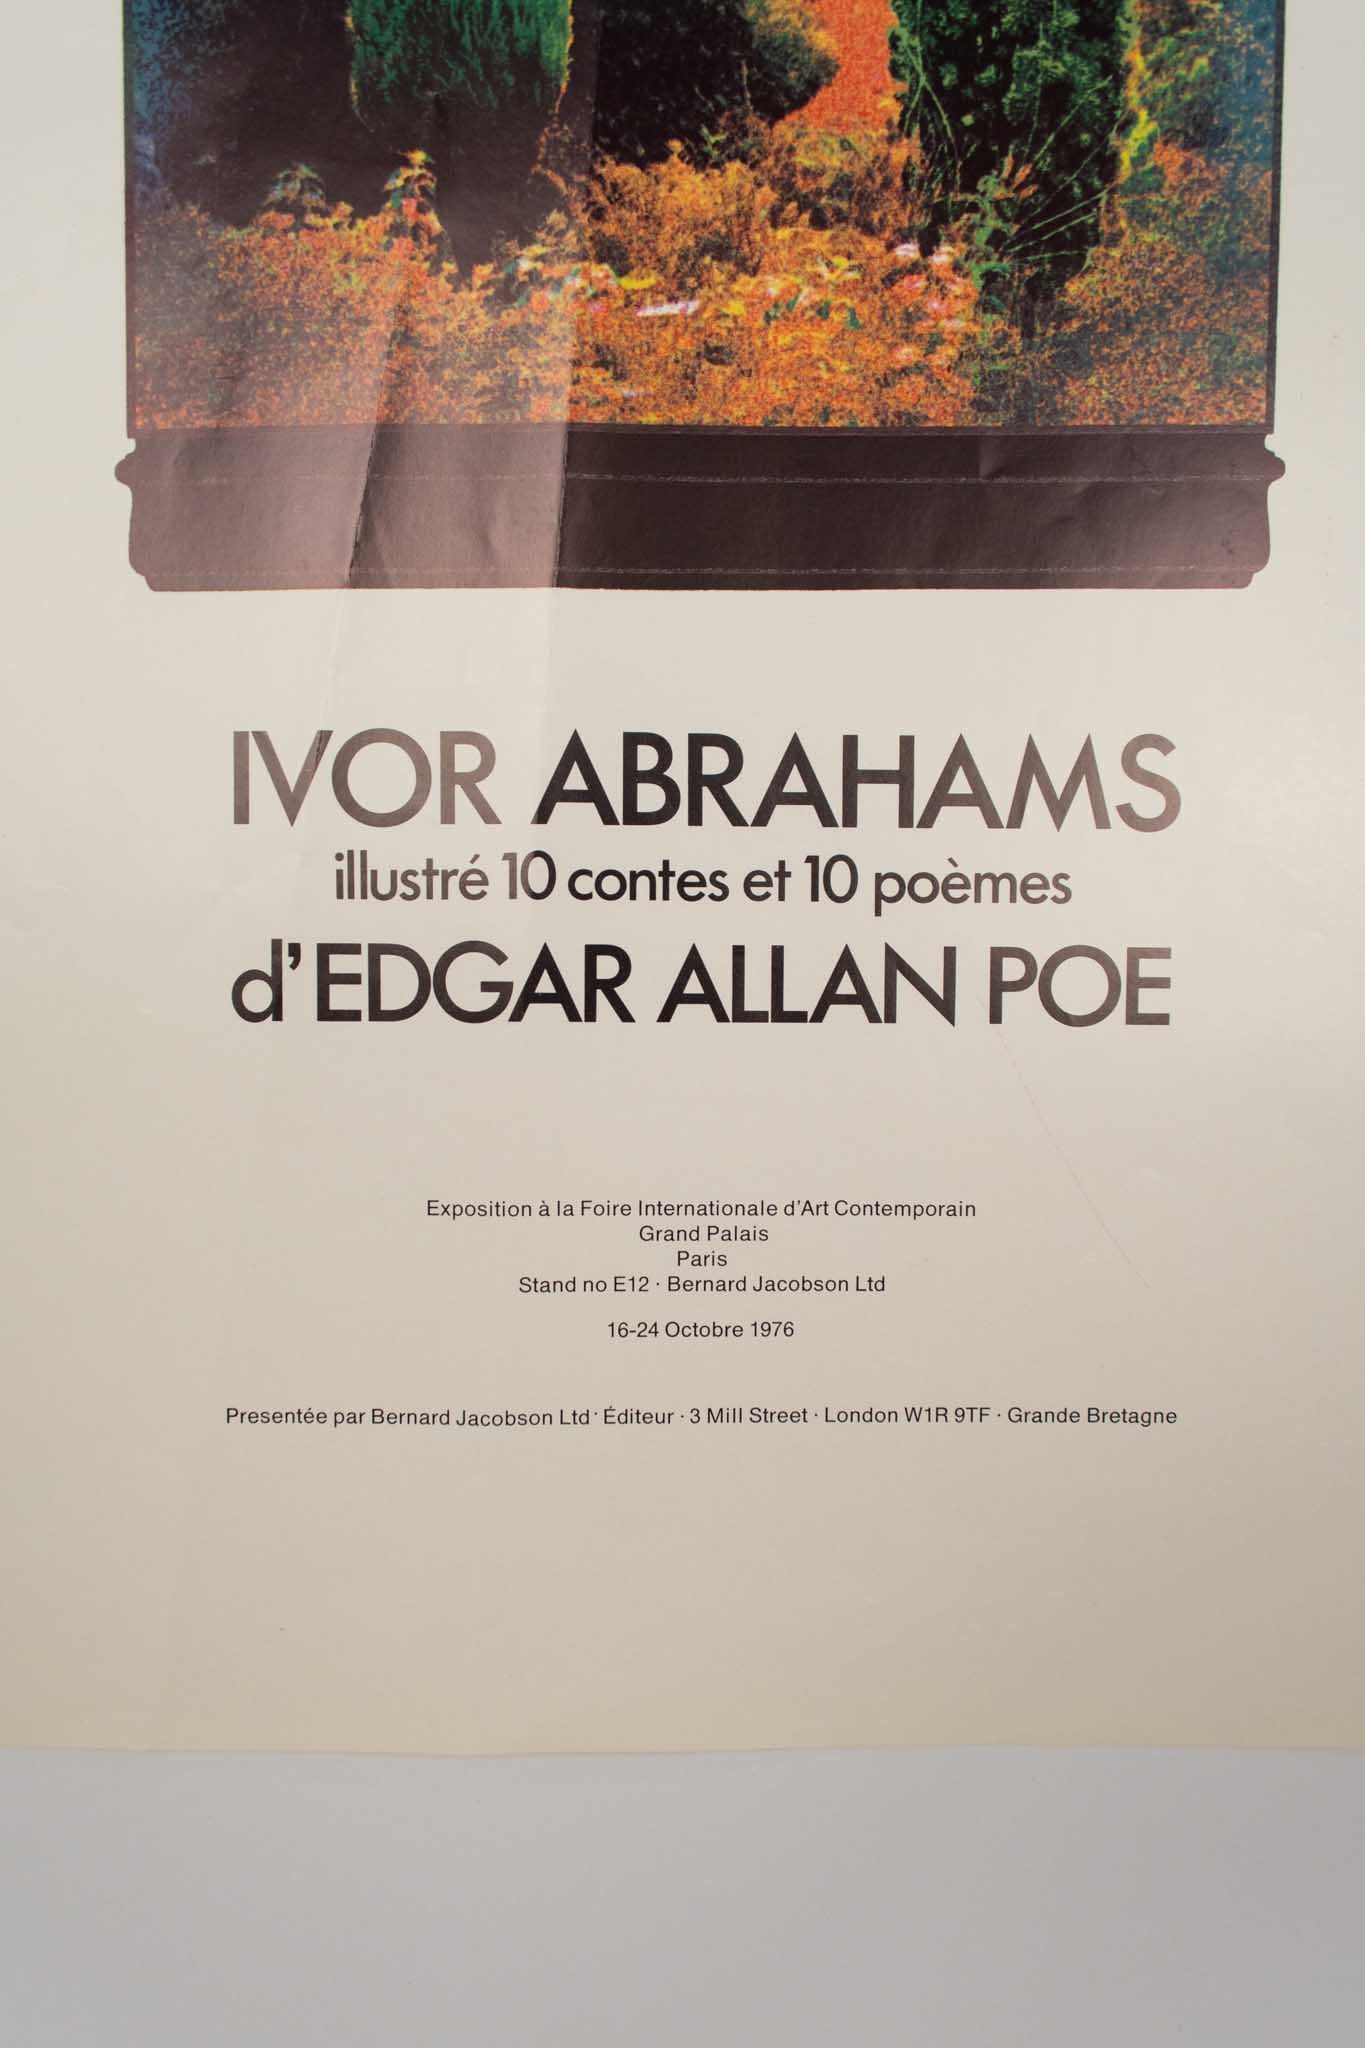 Ivor Abrahams "Illustrates 10 Stories and 10 Poems by Edgar Allen Poe" Print